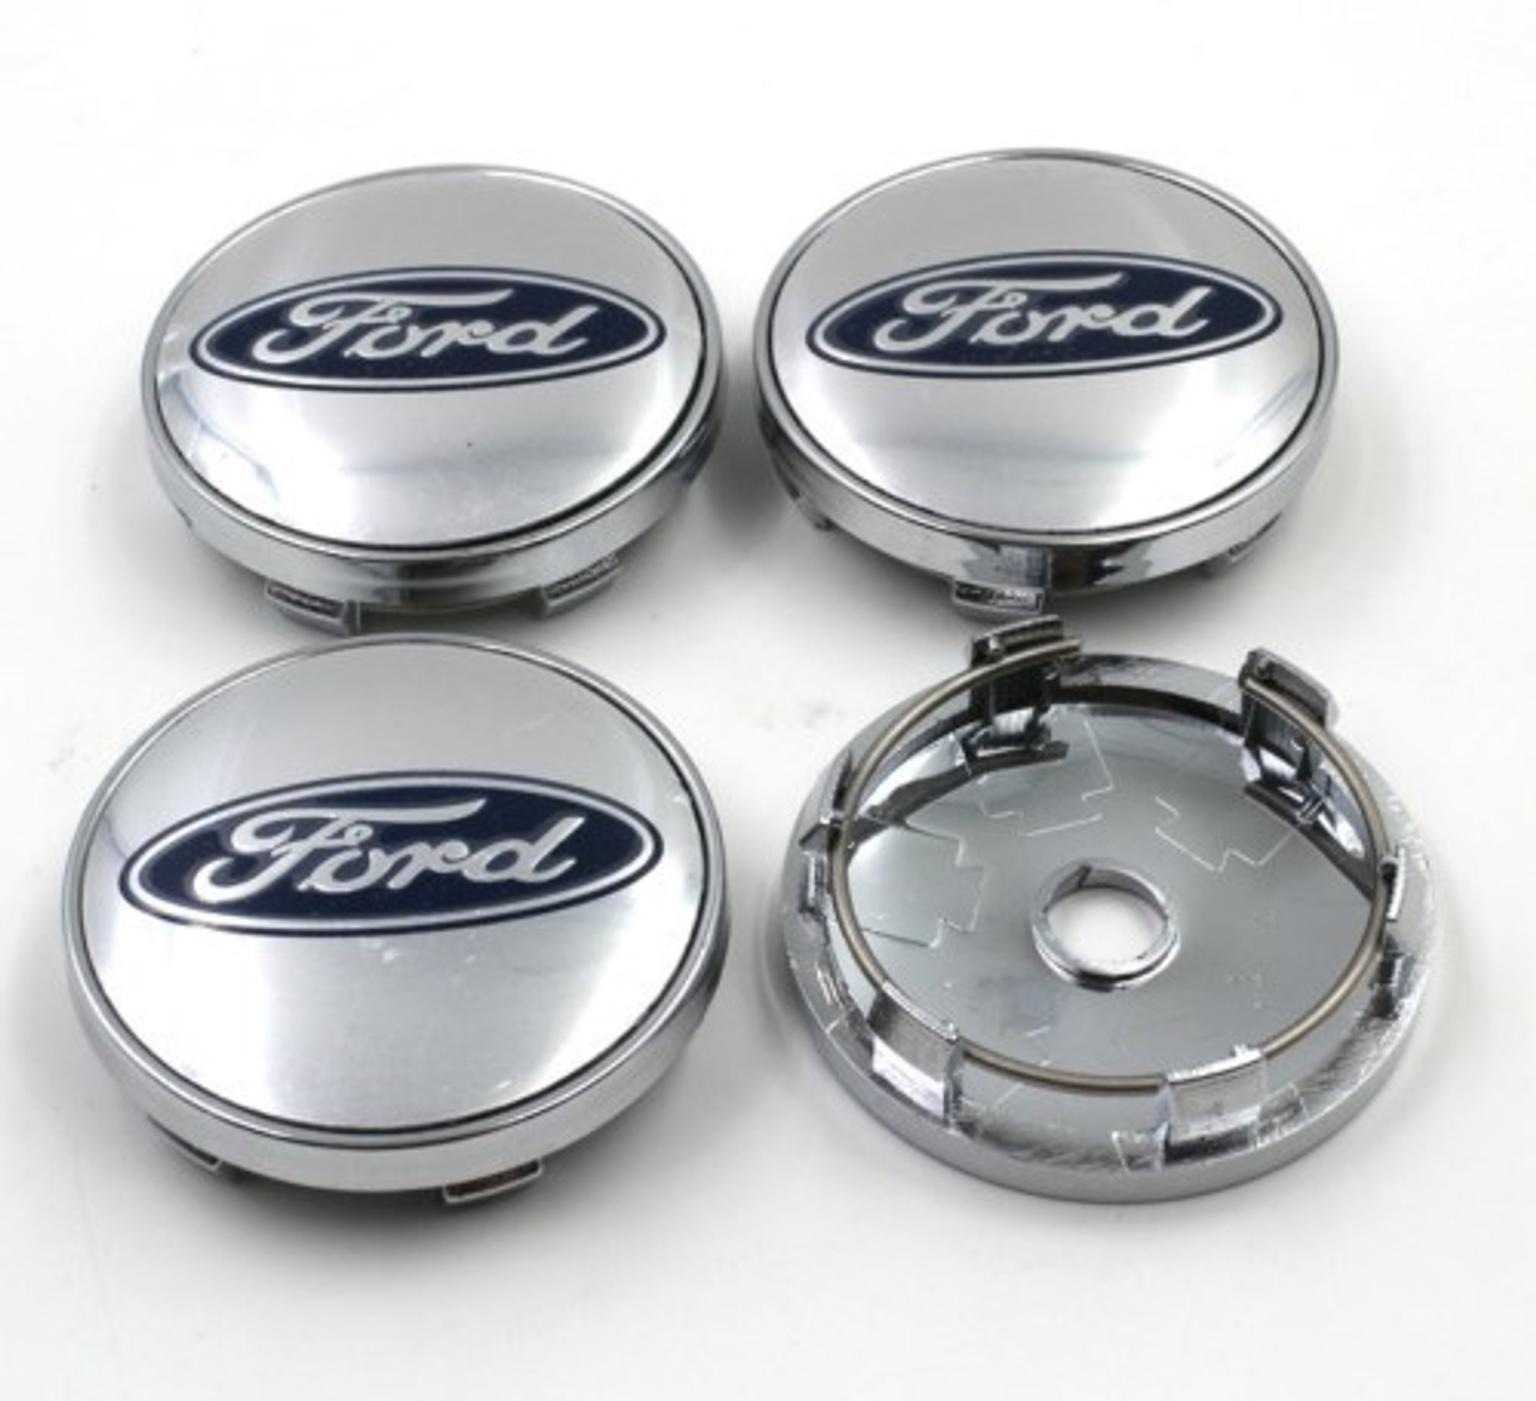 4x 54mm Ford alloy wheel centre caps 